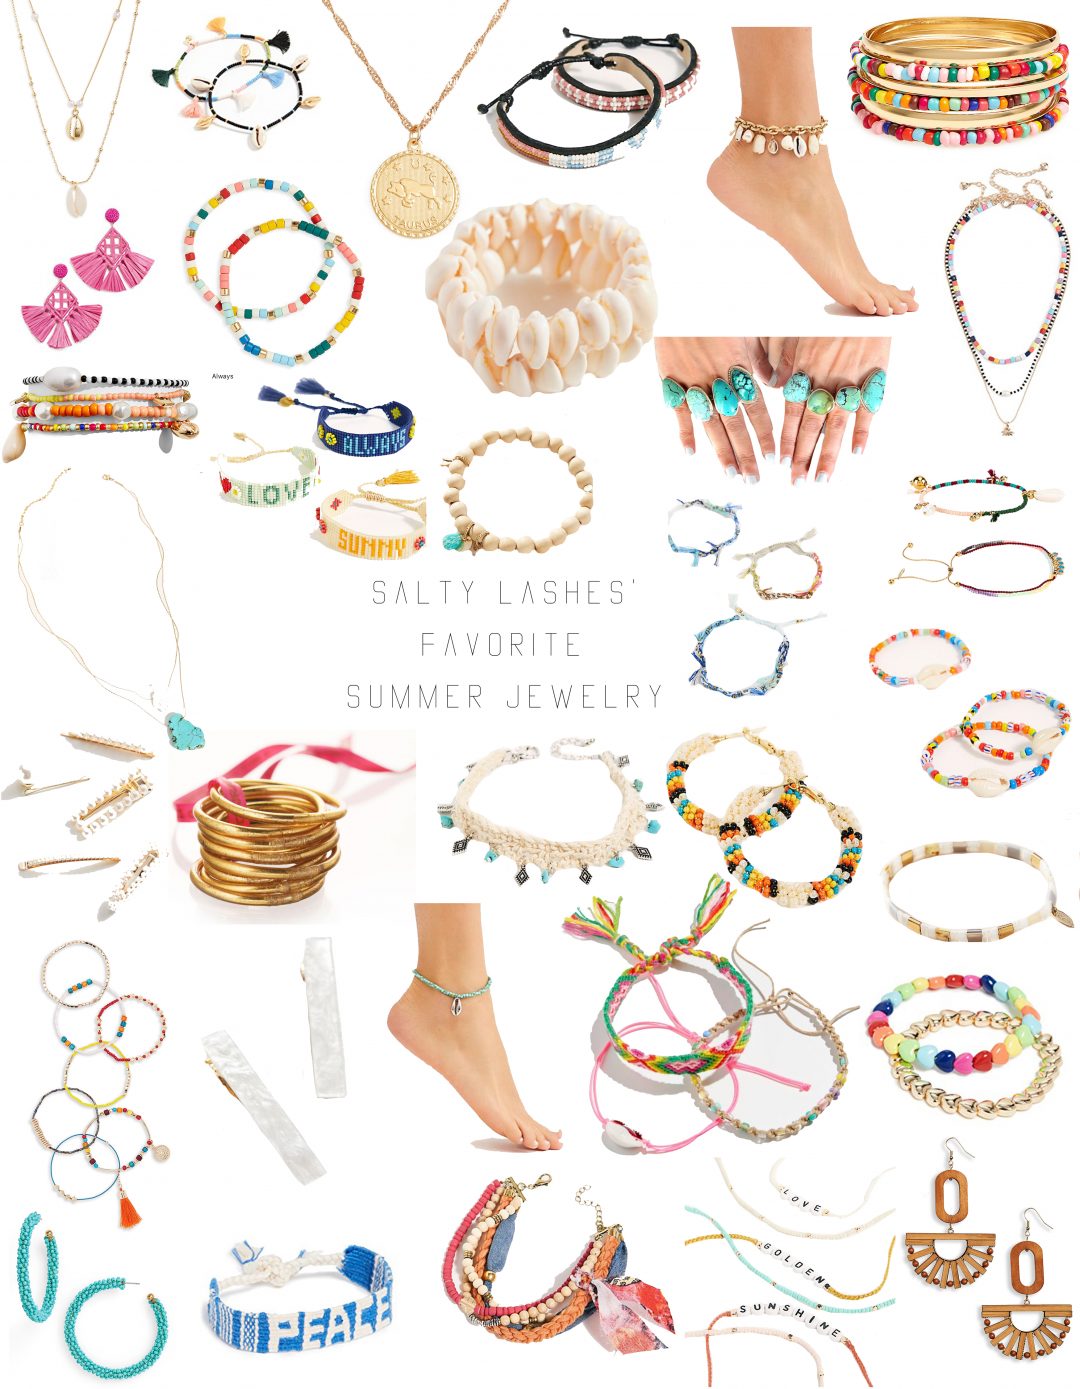 Summer Jewelry Trends | Salty Lashes Fashion Blog